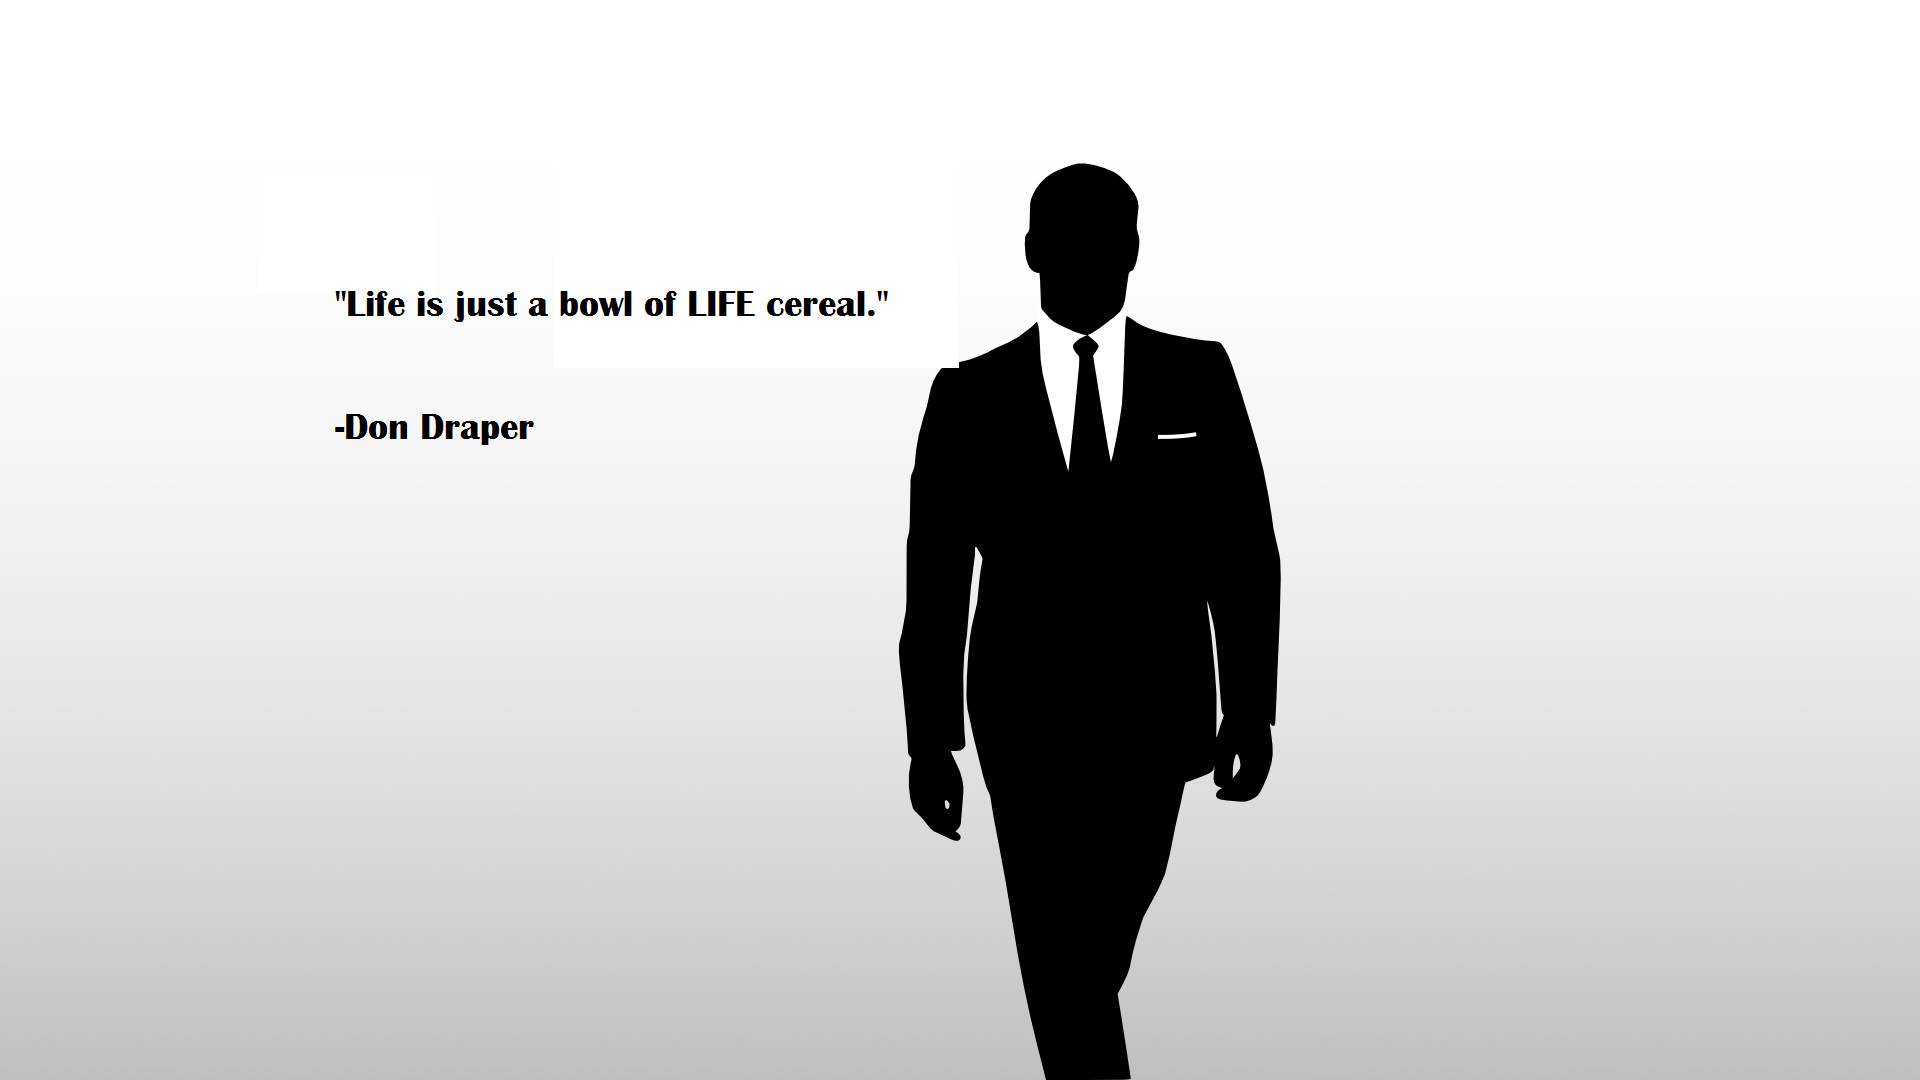 1920x1080 Made a wallpaper of a seriously underrated Don Draper quote.